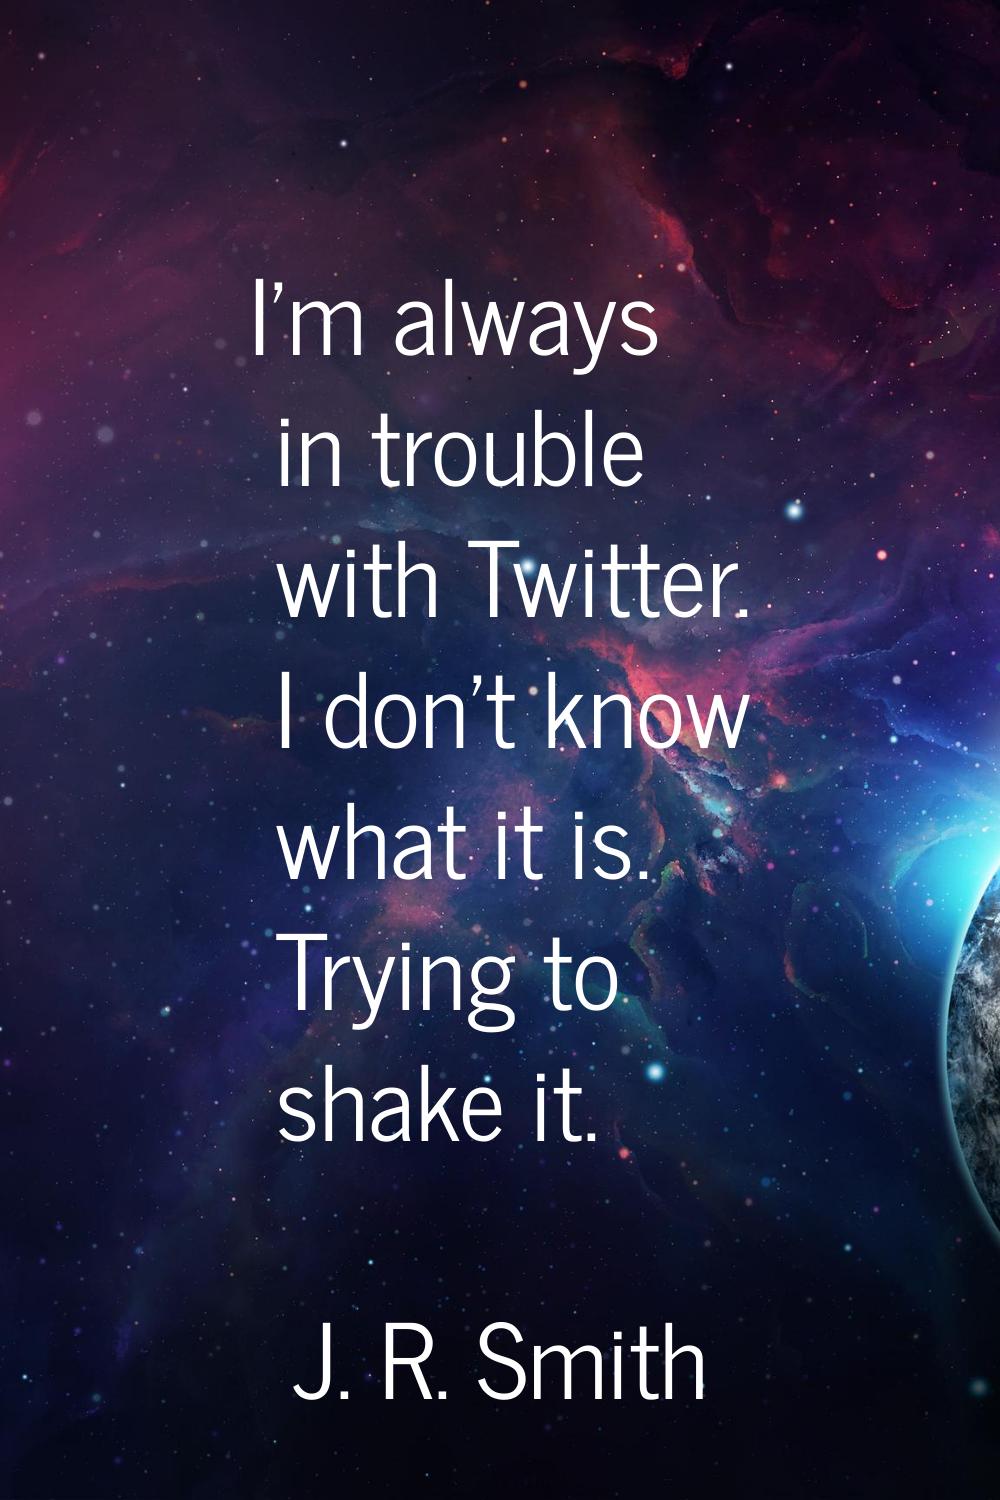 I'm always in trouble with Twitter. I don't know what it is. Trying to shake it.